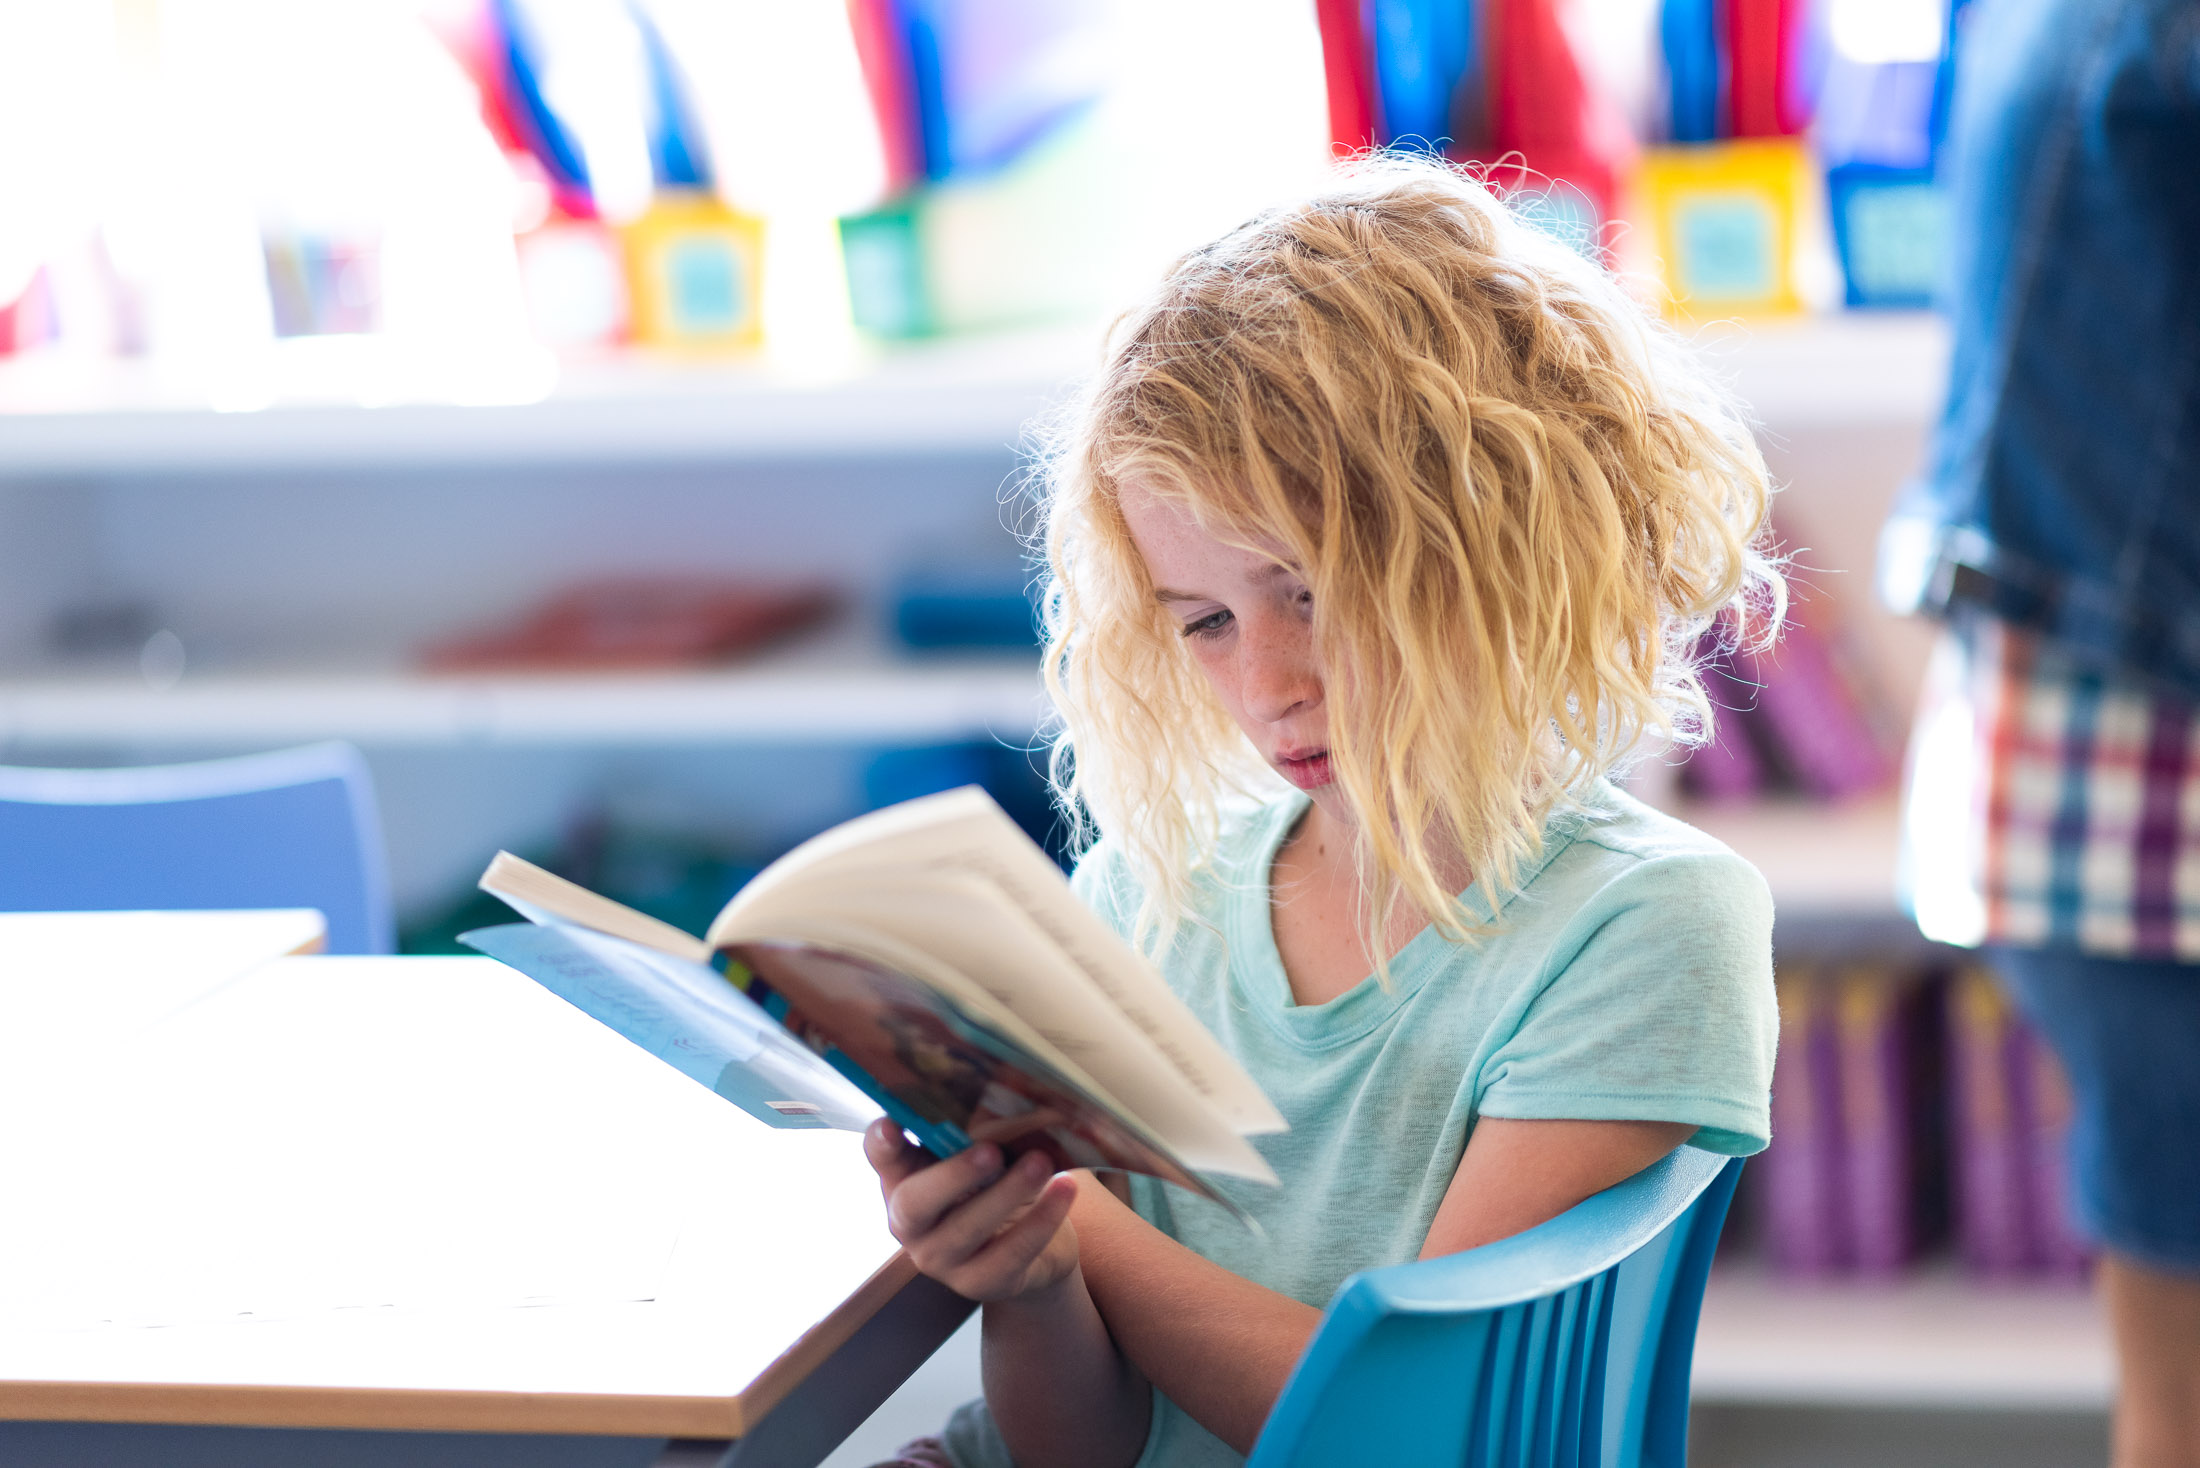 10 Books To Inspire Your Child – The IB Learner Profile Attributes